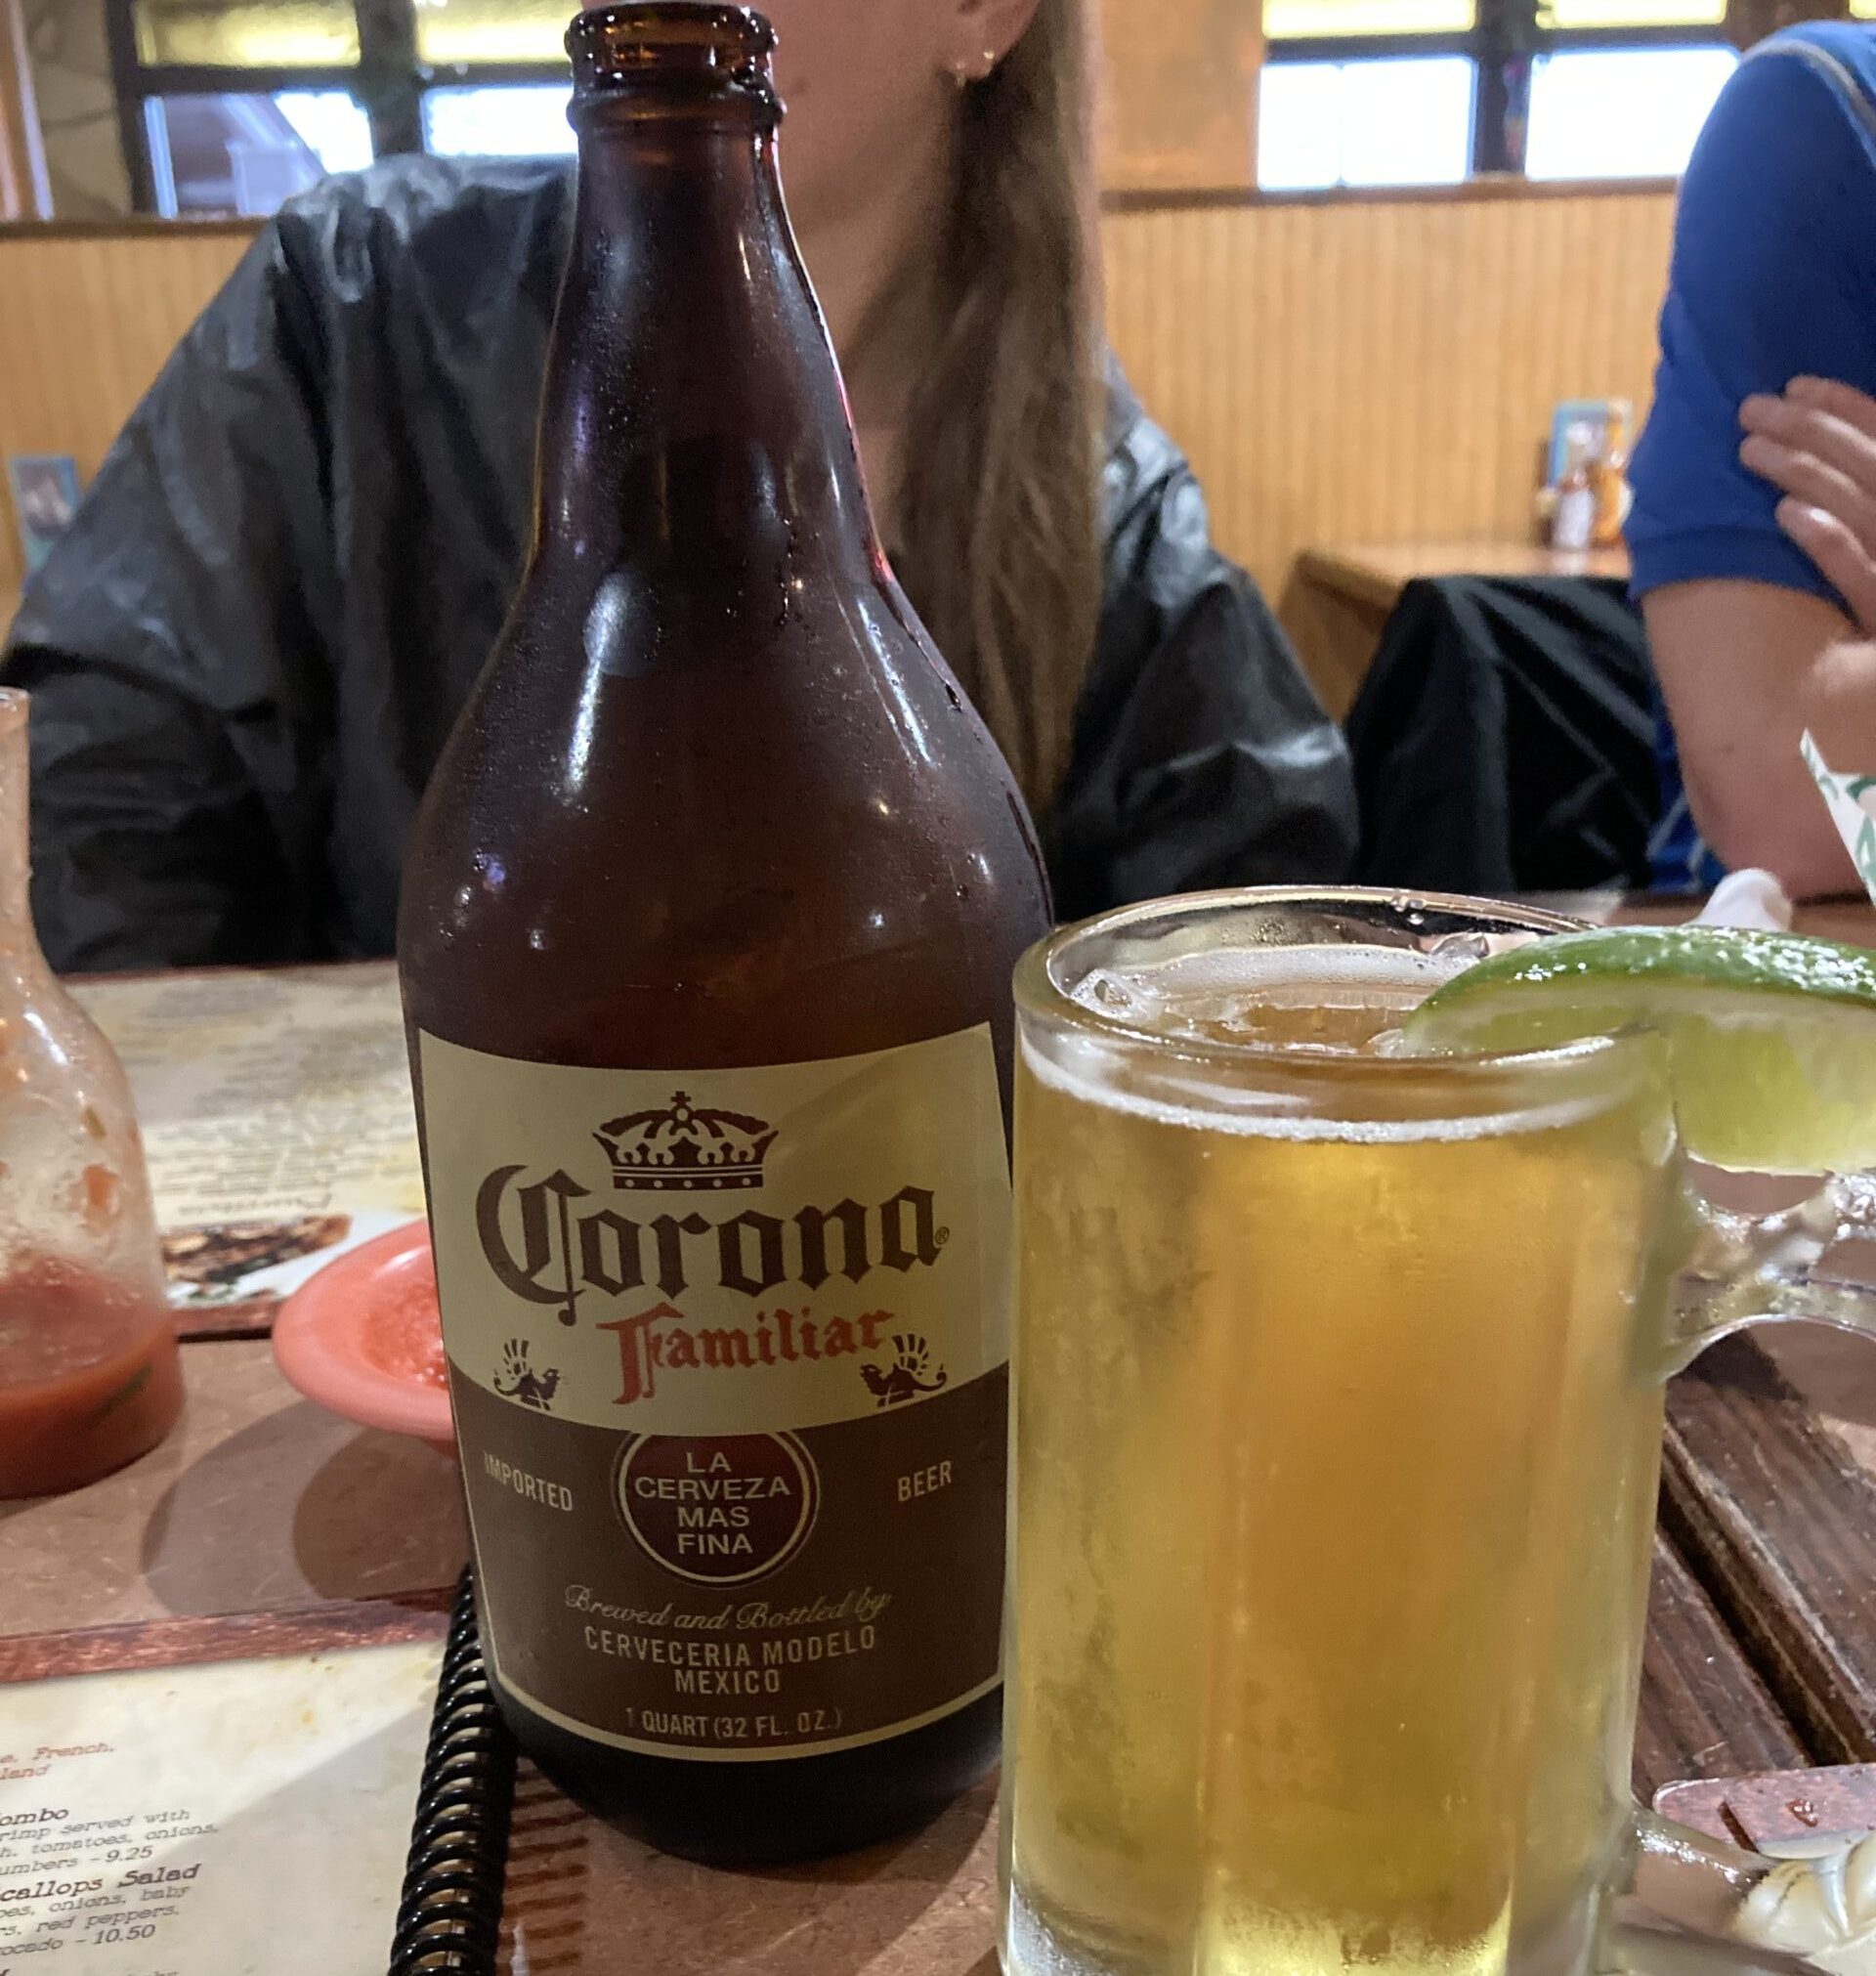 Mi Puerto offered a “family-sized” Corona, which satisfied my craving for a beer. 